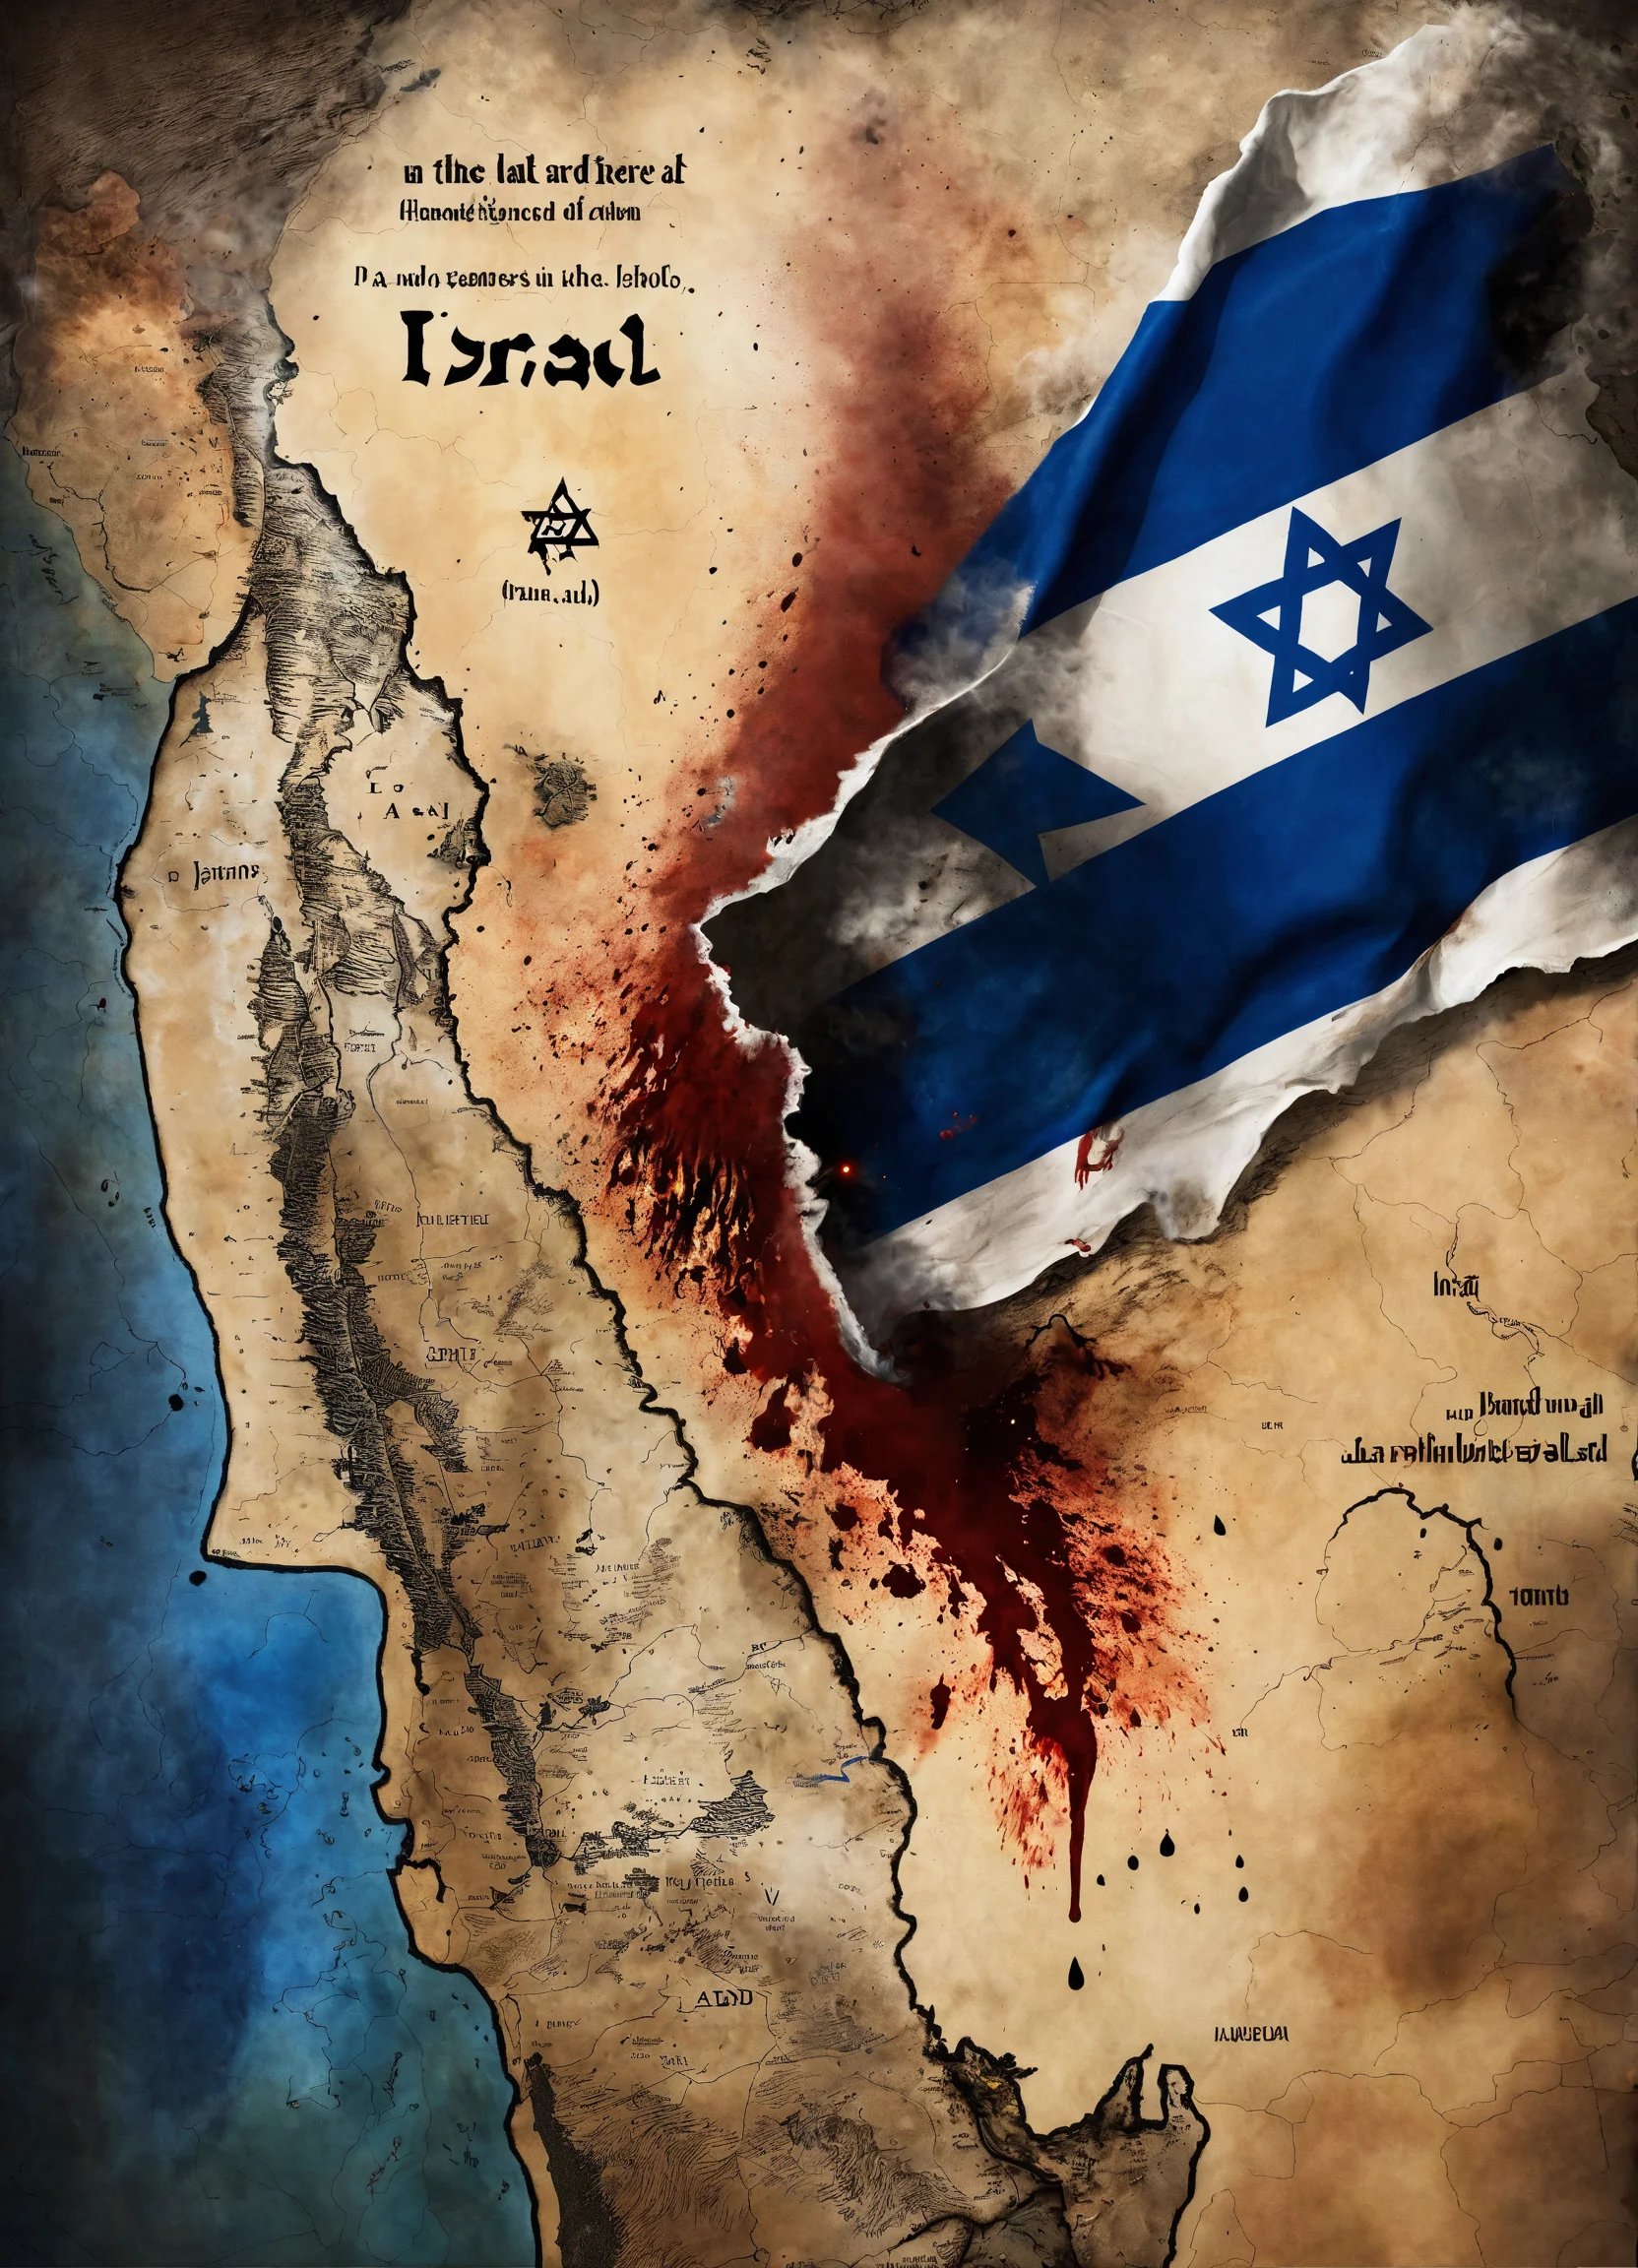 A map of the Land of Israel.jpg